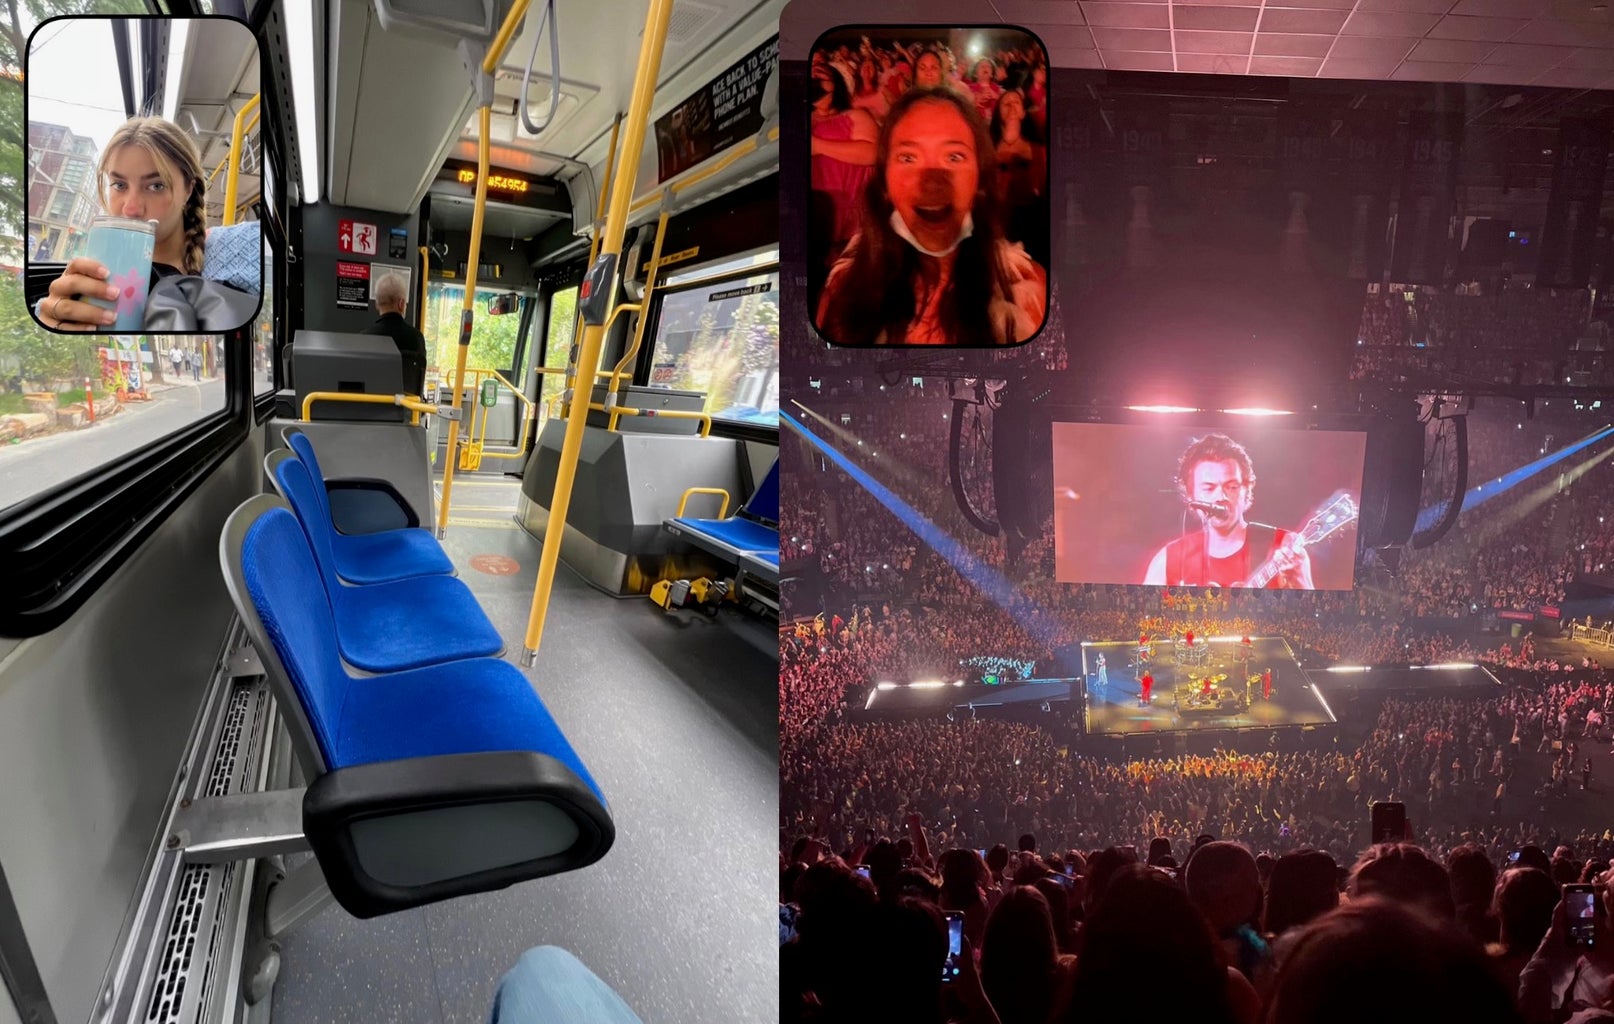 Two BeReal photos, one of someone on a bus and the other of someone at a Harry Styles concert.